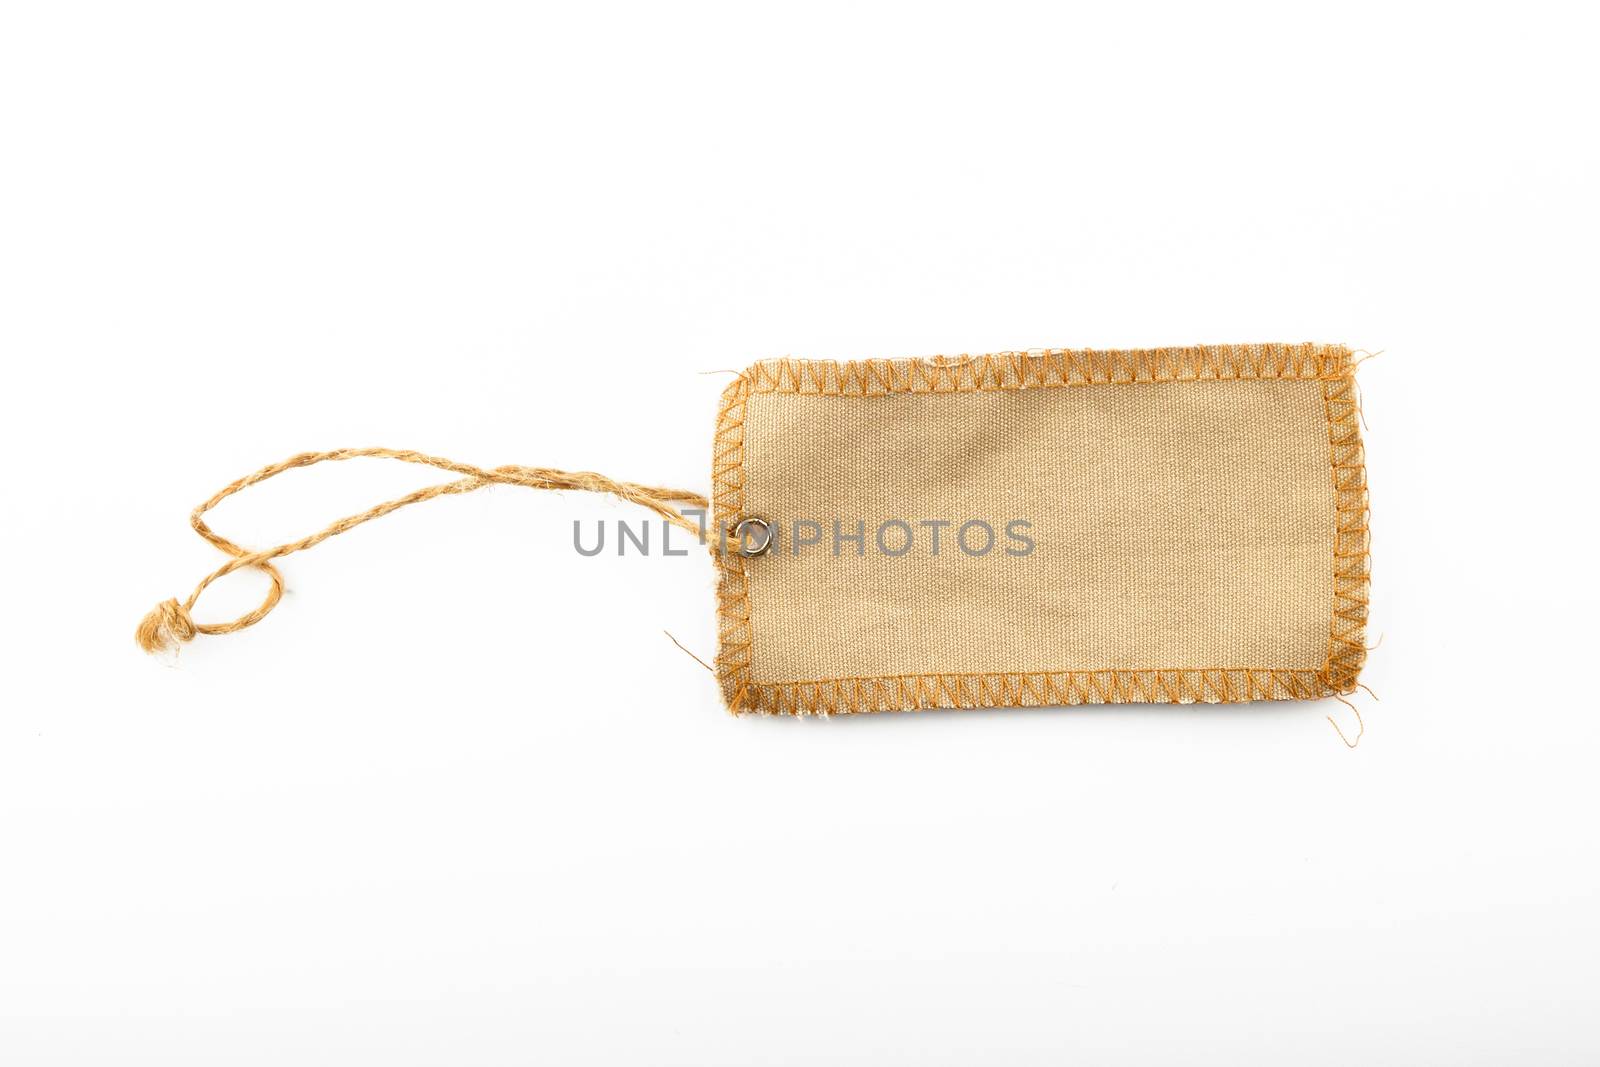 Blank canvas label tag overlocked with jute rope and metal rivet isolated on white